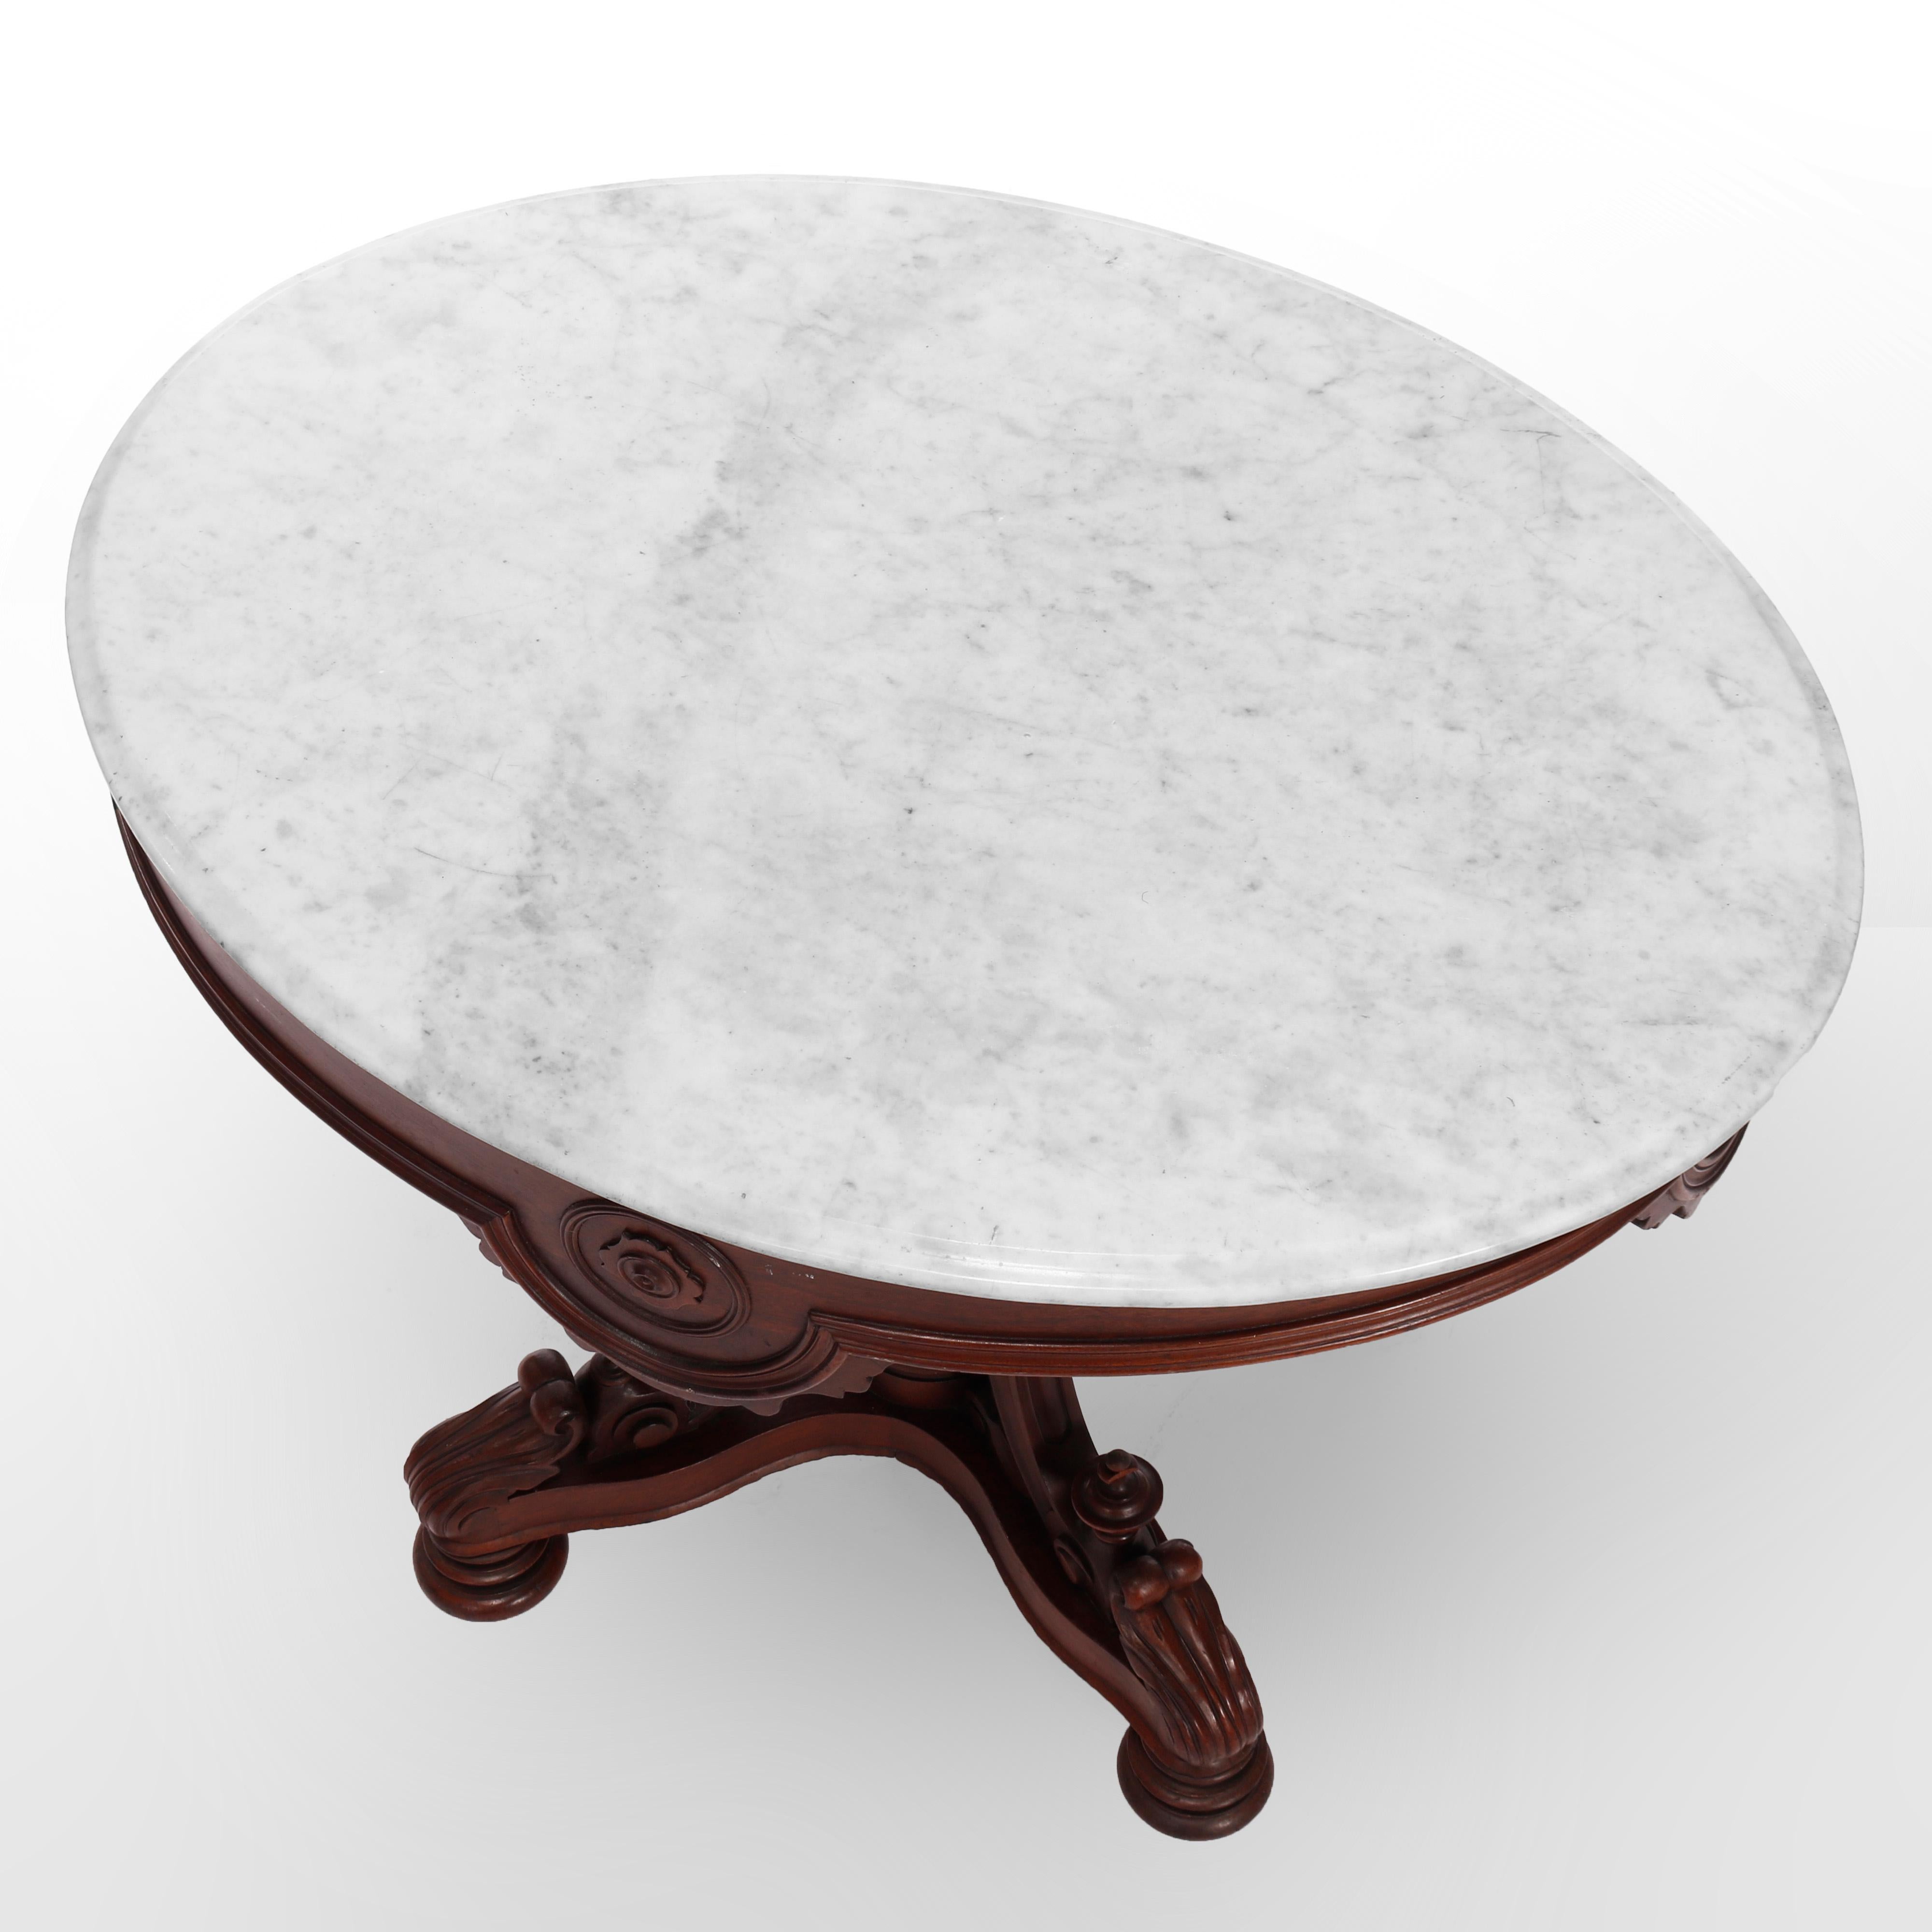 Antique Rococo Revival Carved Rosewood Oval Marble Top Table, Circa 1870 3